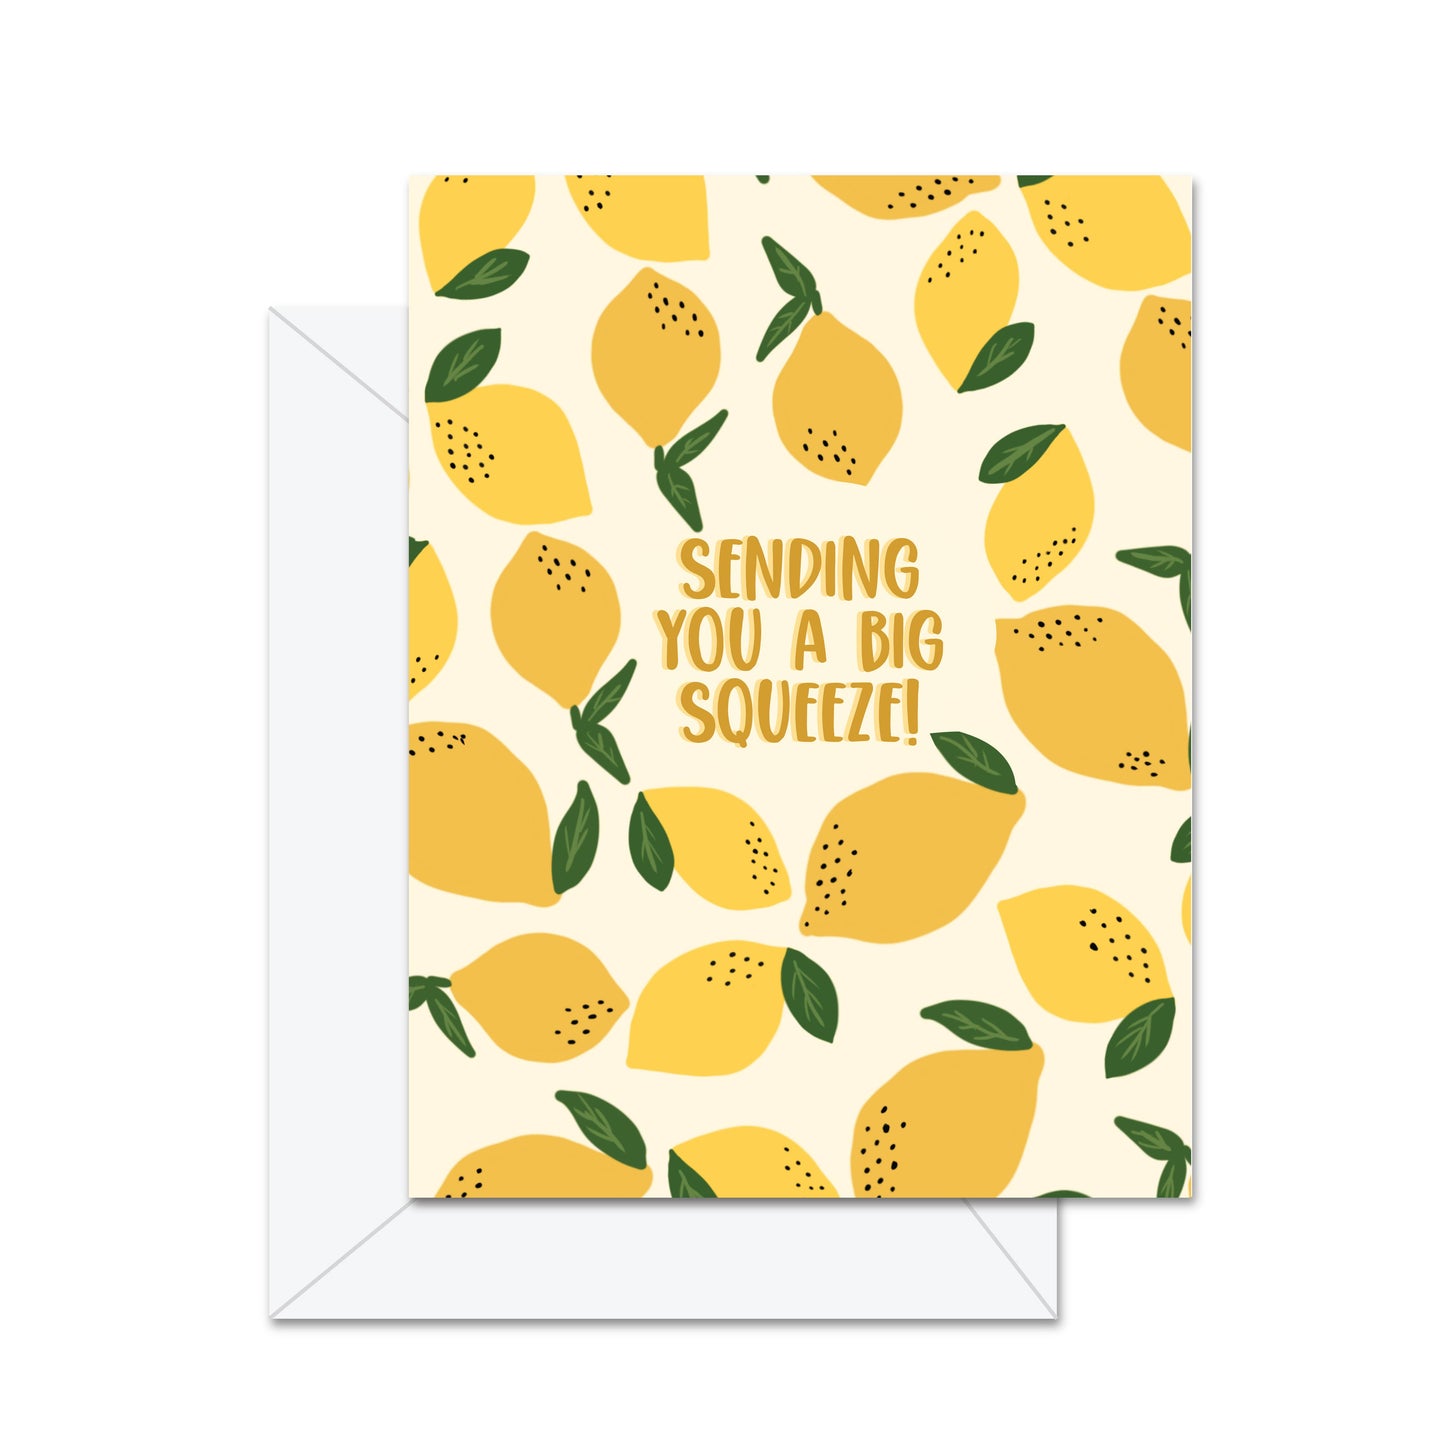 Jaybee Design - Sending You A Big Squeeze! - Greeting Card